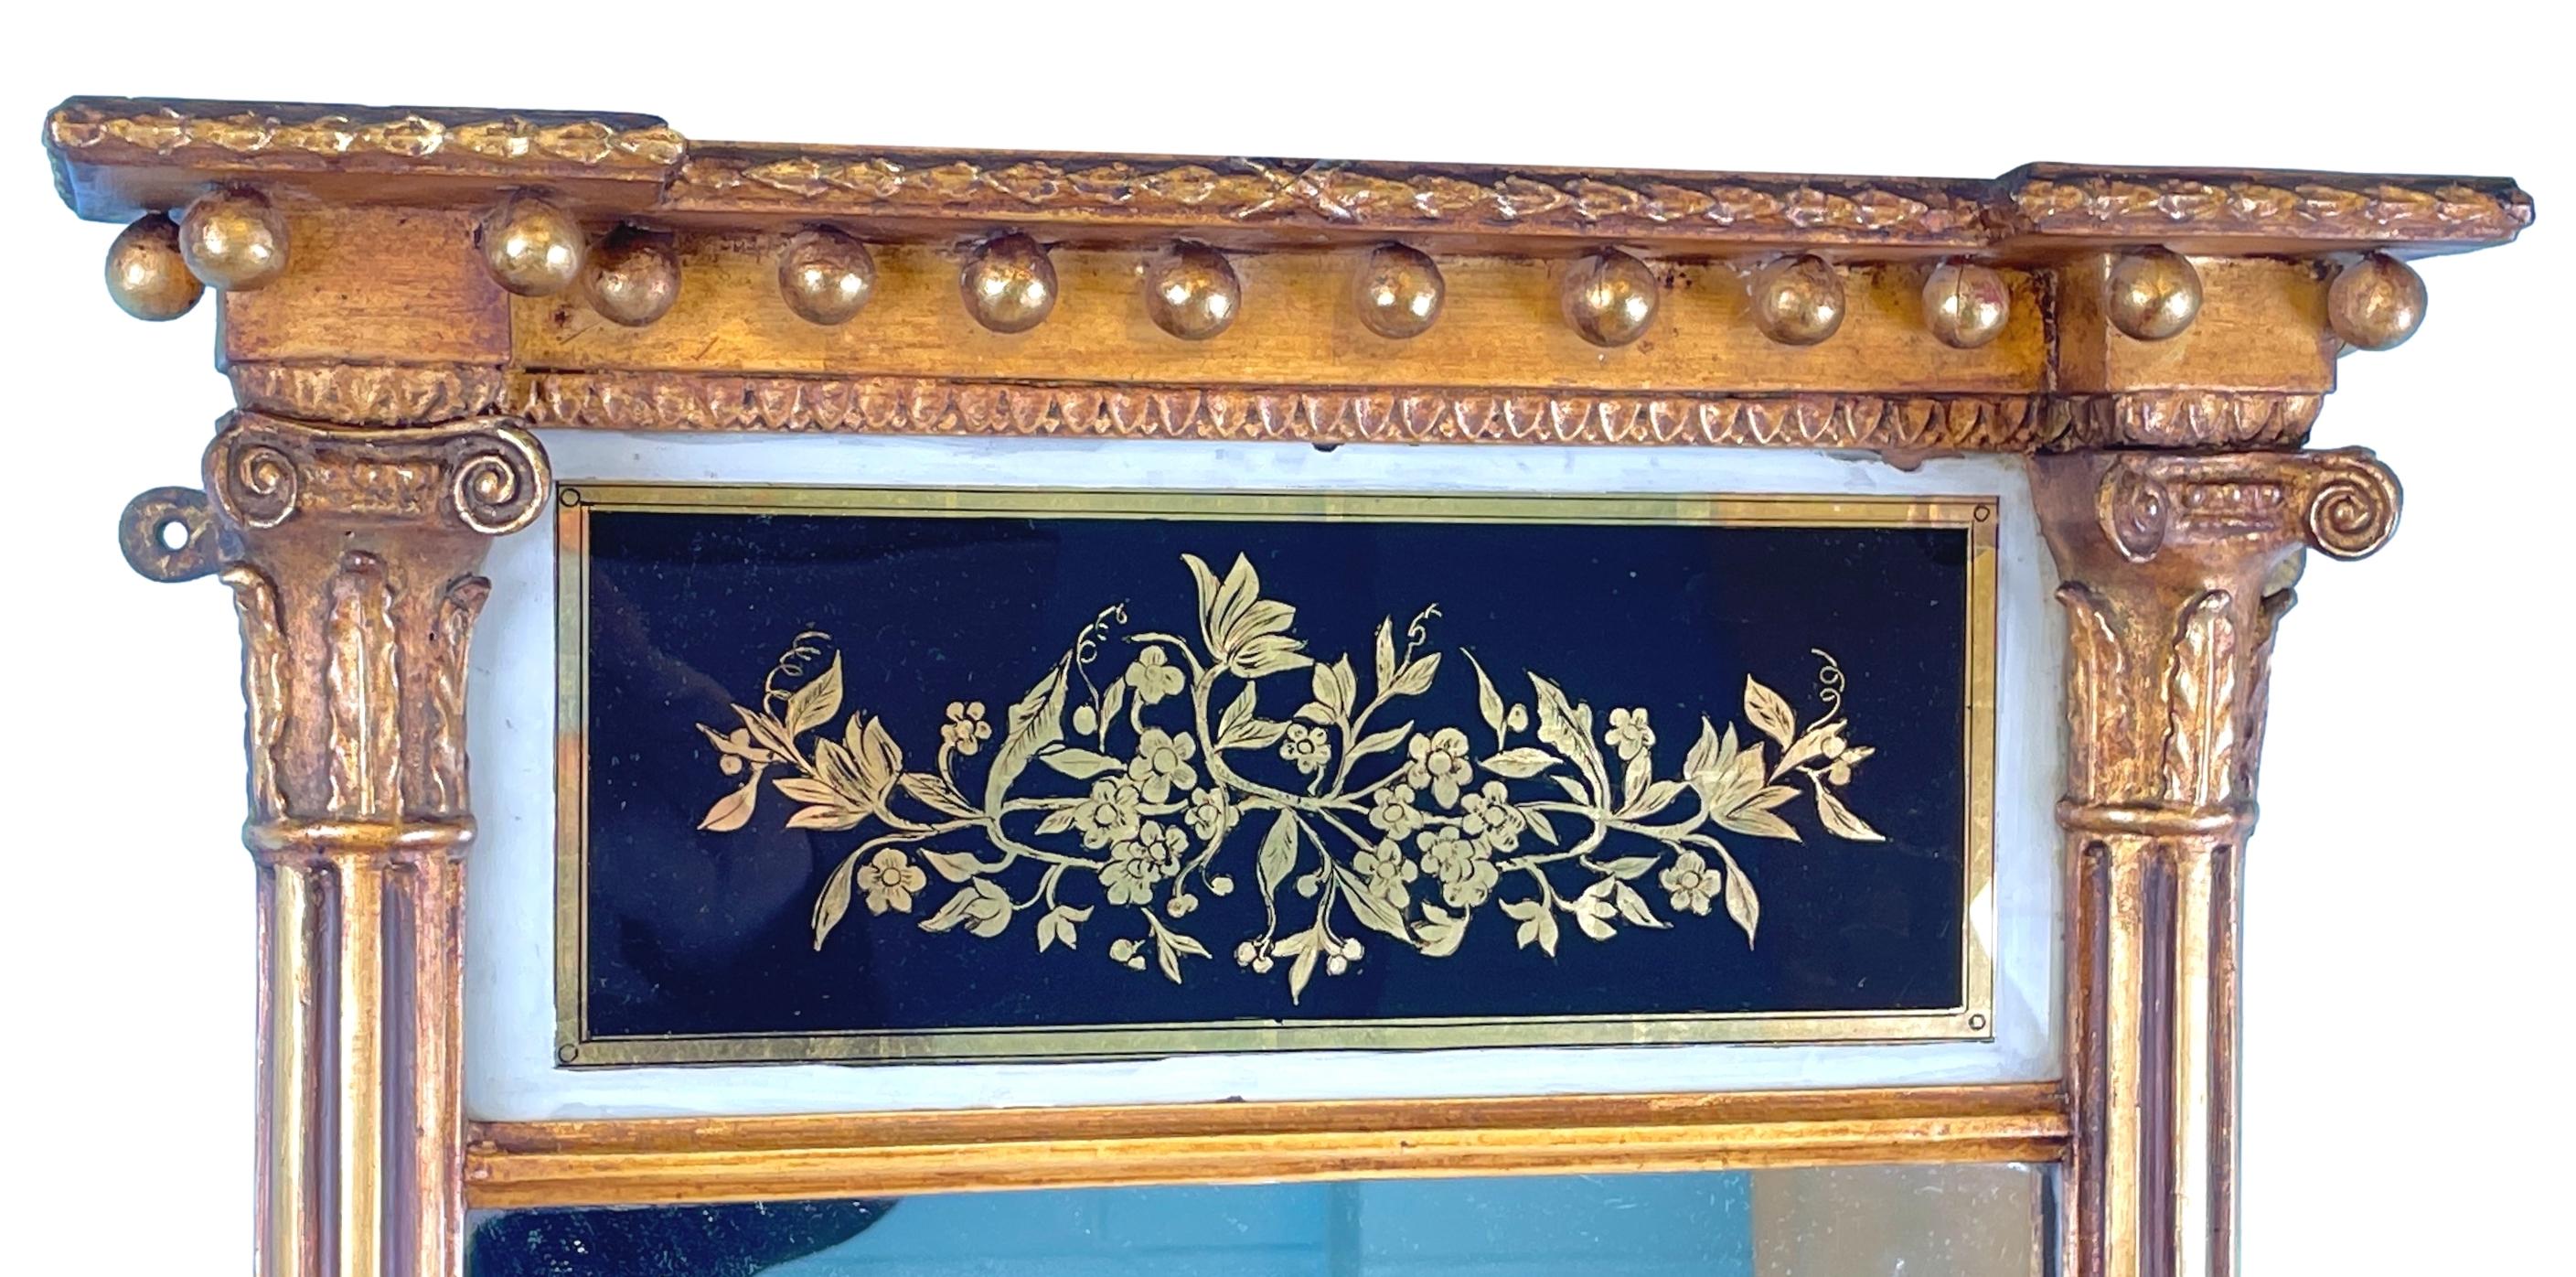 A very attractive mid-19th century gilt pier mirror, of unusually small proportions, having elegant foliate pattern verre églomisé panel, over original mirror plate flanked by elegant half turned fluted columns, headed by carved scrolling